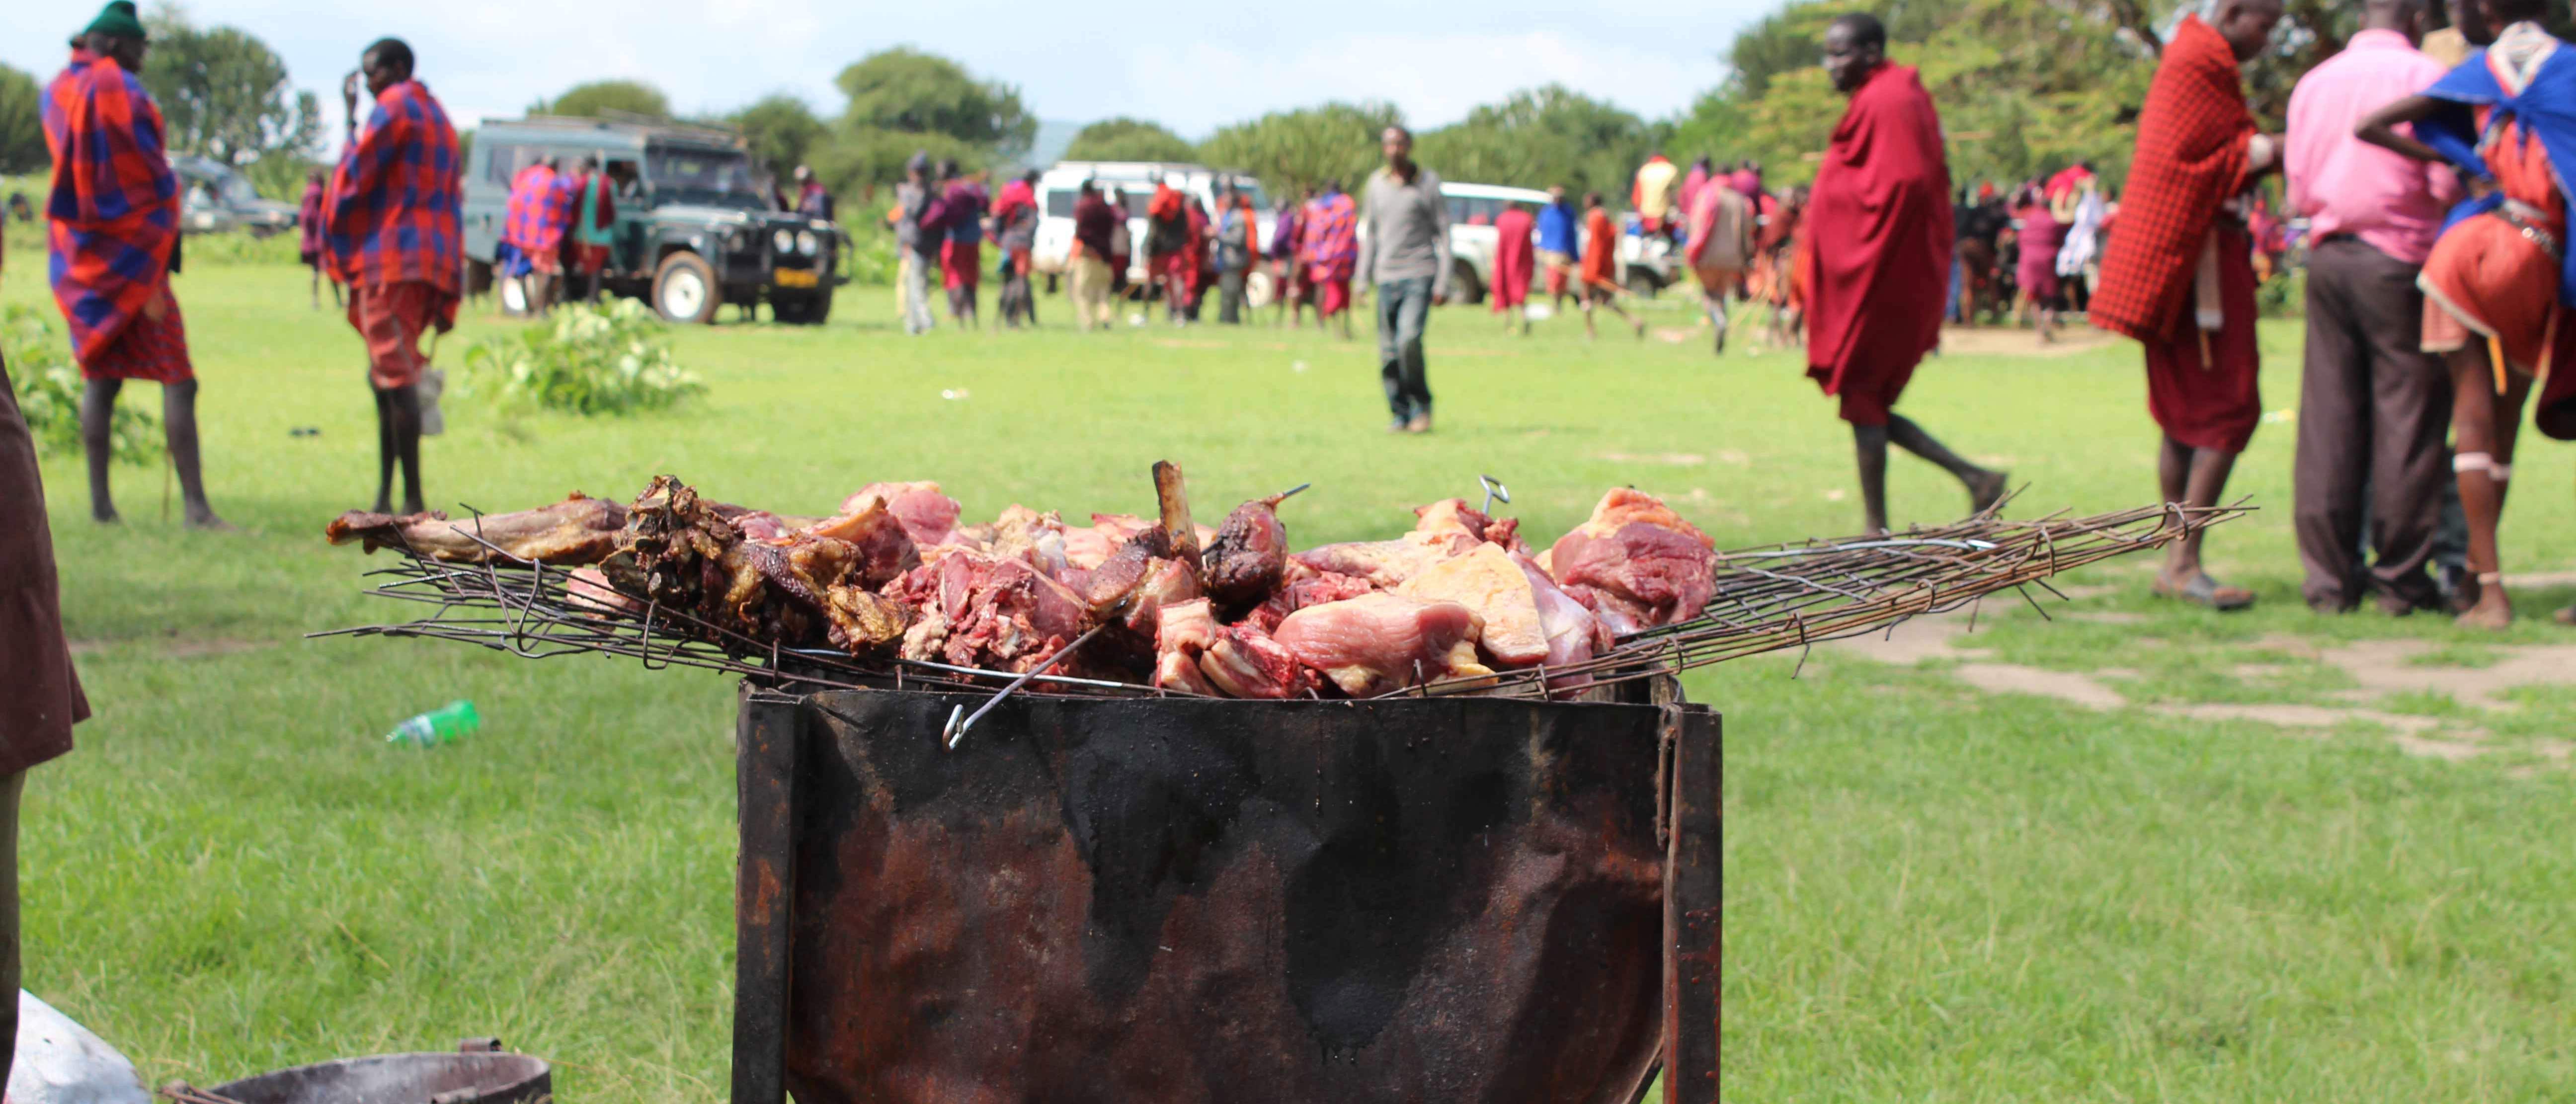 Meat cooking on an open grill with people in the background